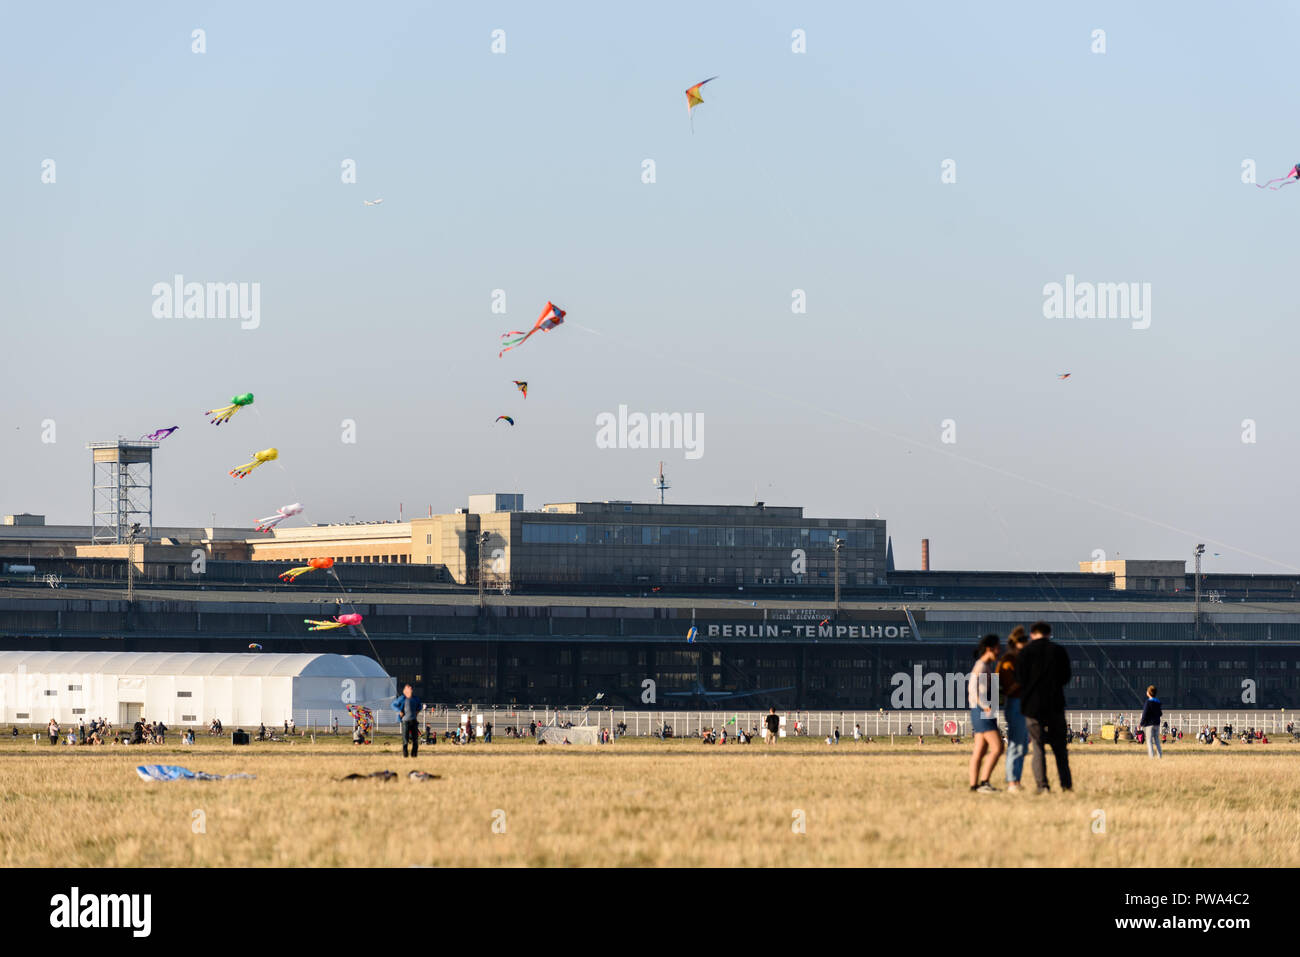 Visitors are seen on the Tempelhof field. The good weather in October brings many visitors to the park at the former Tempelhof Airport. Stock Photo